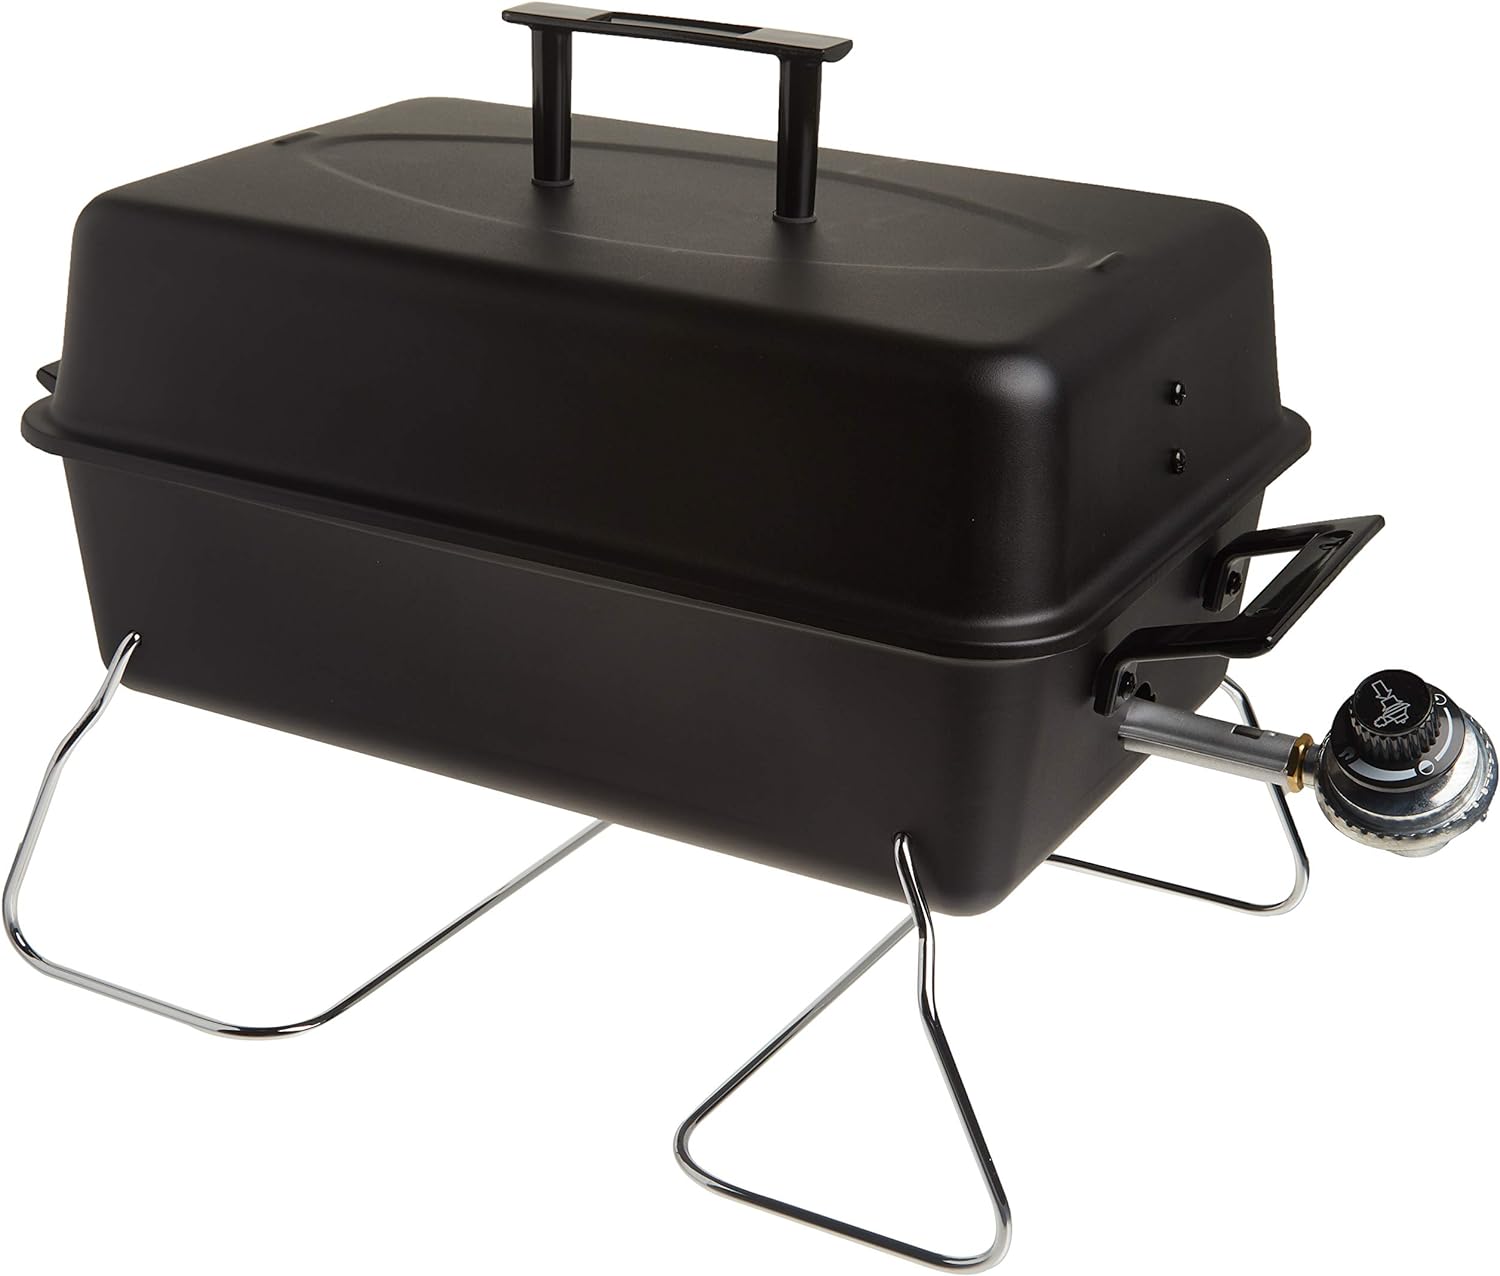 Char-Broil Portable Convective 1-Burner Stainless Steel Propane Gas Grill - 465133010